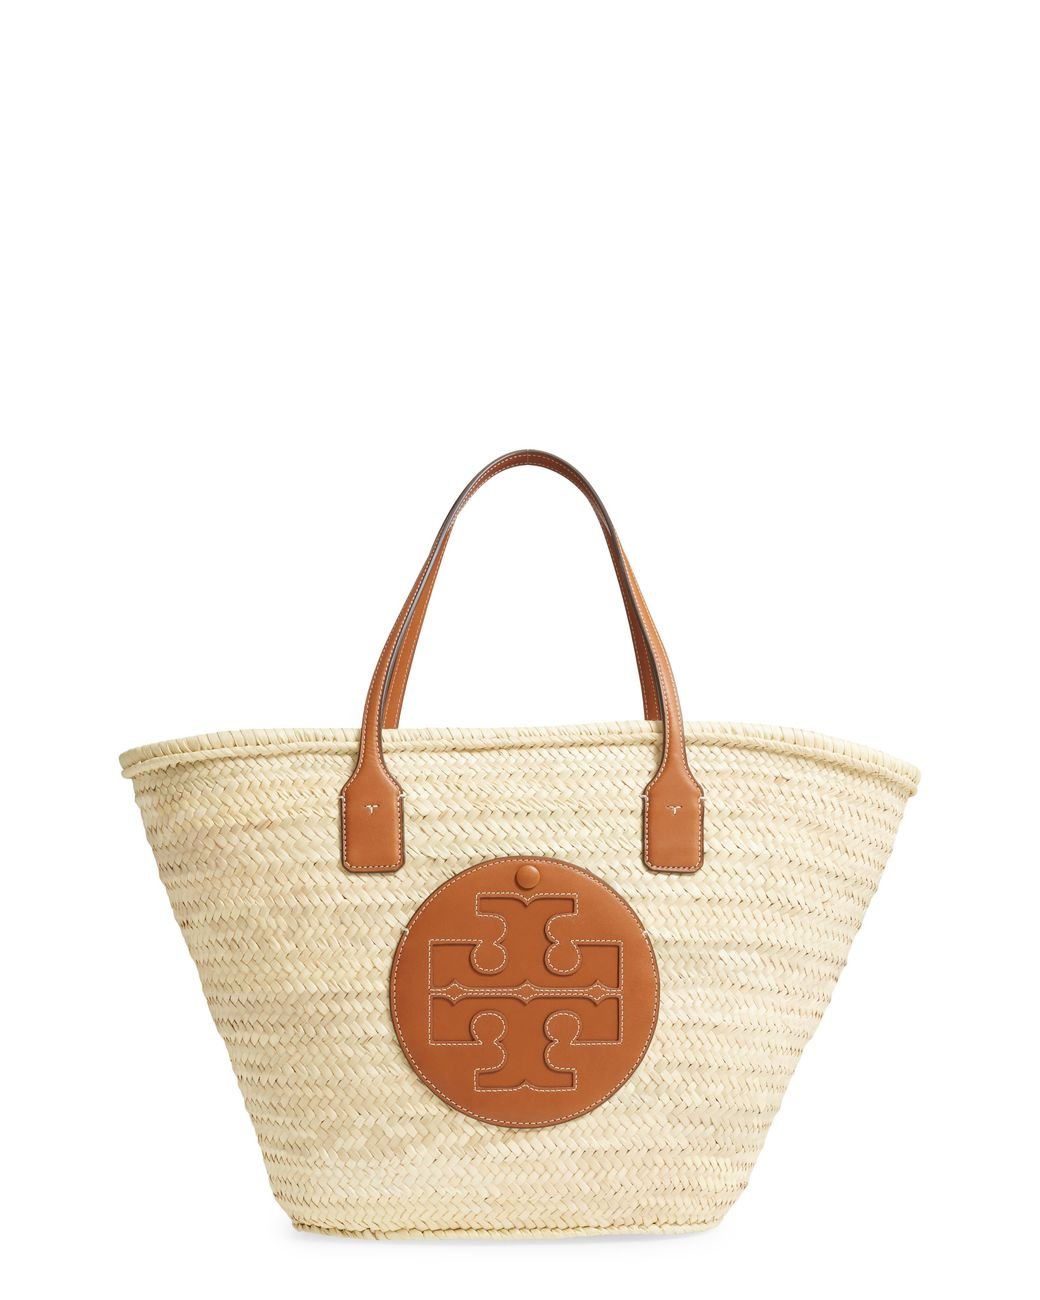 Tory Burch Leather Ella Straw Basket Tote in Natural - Lyst